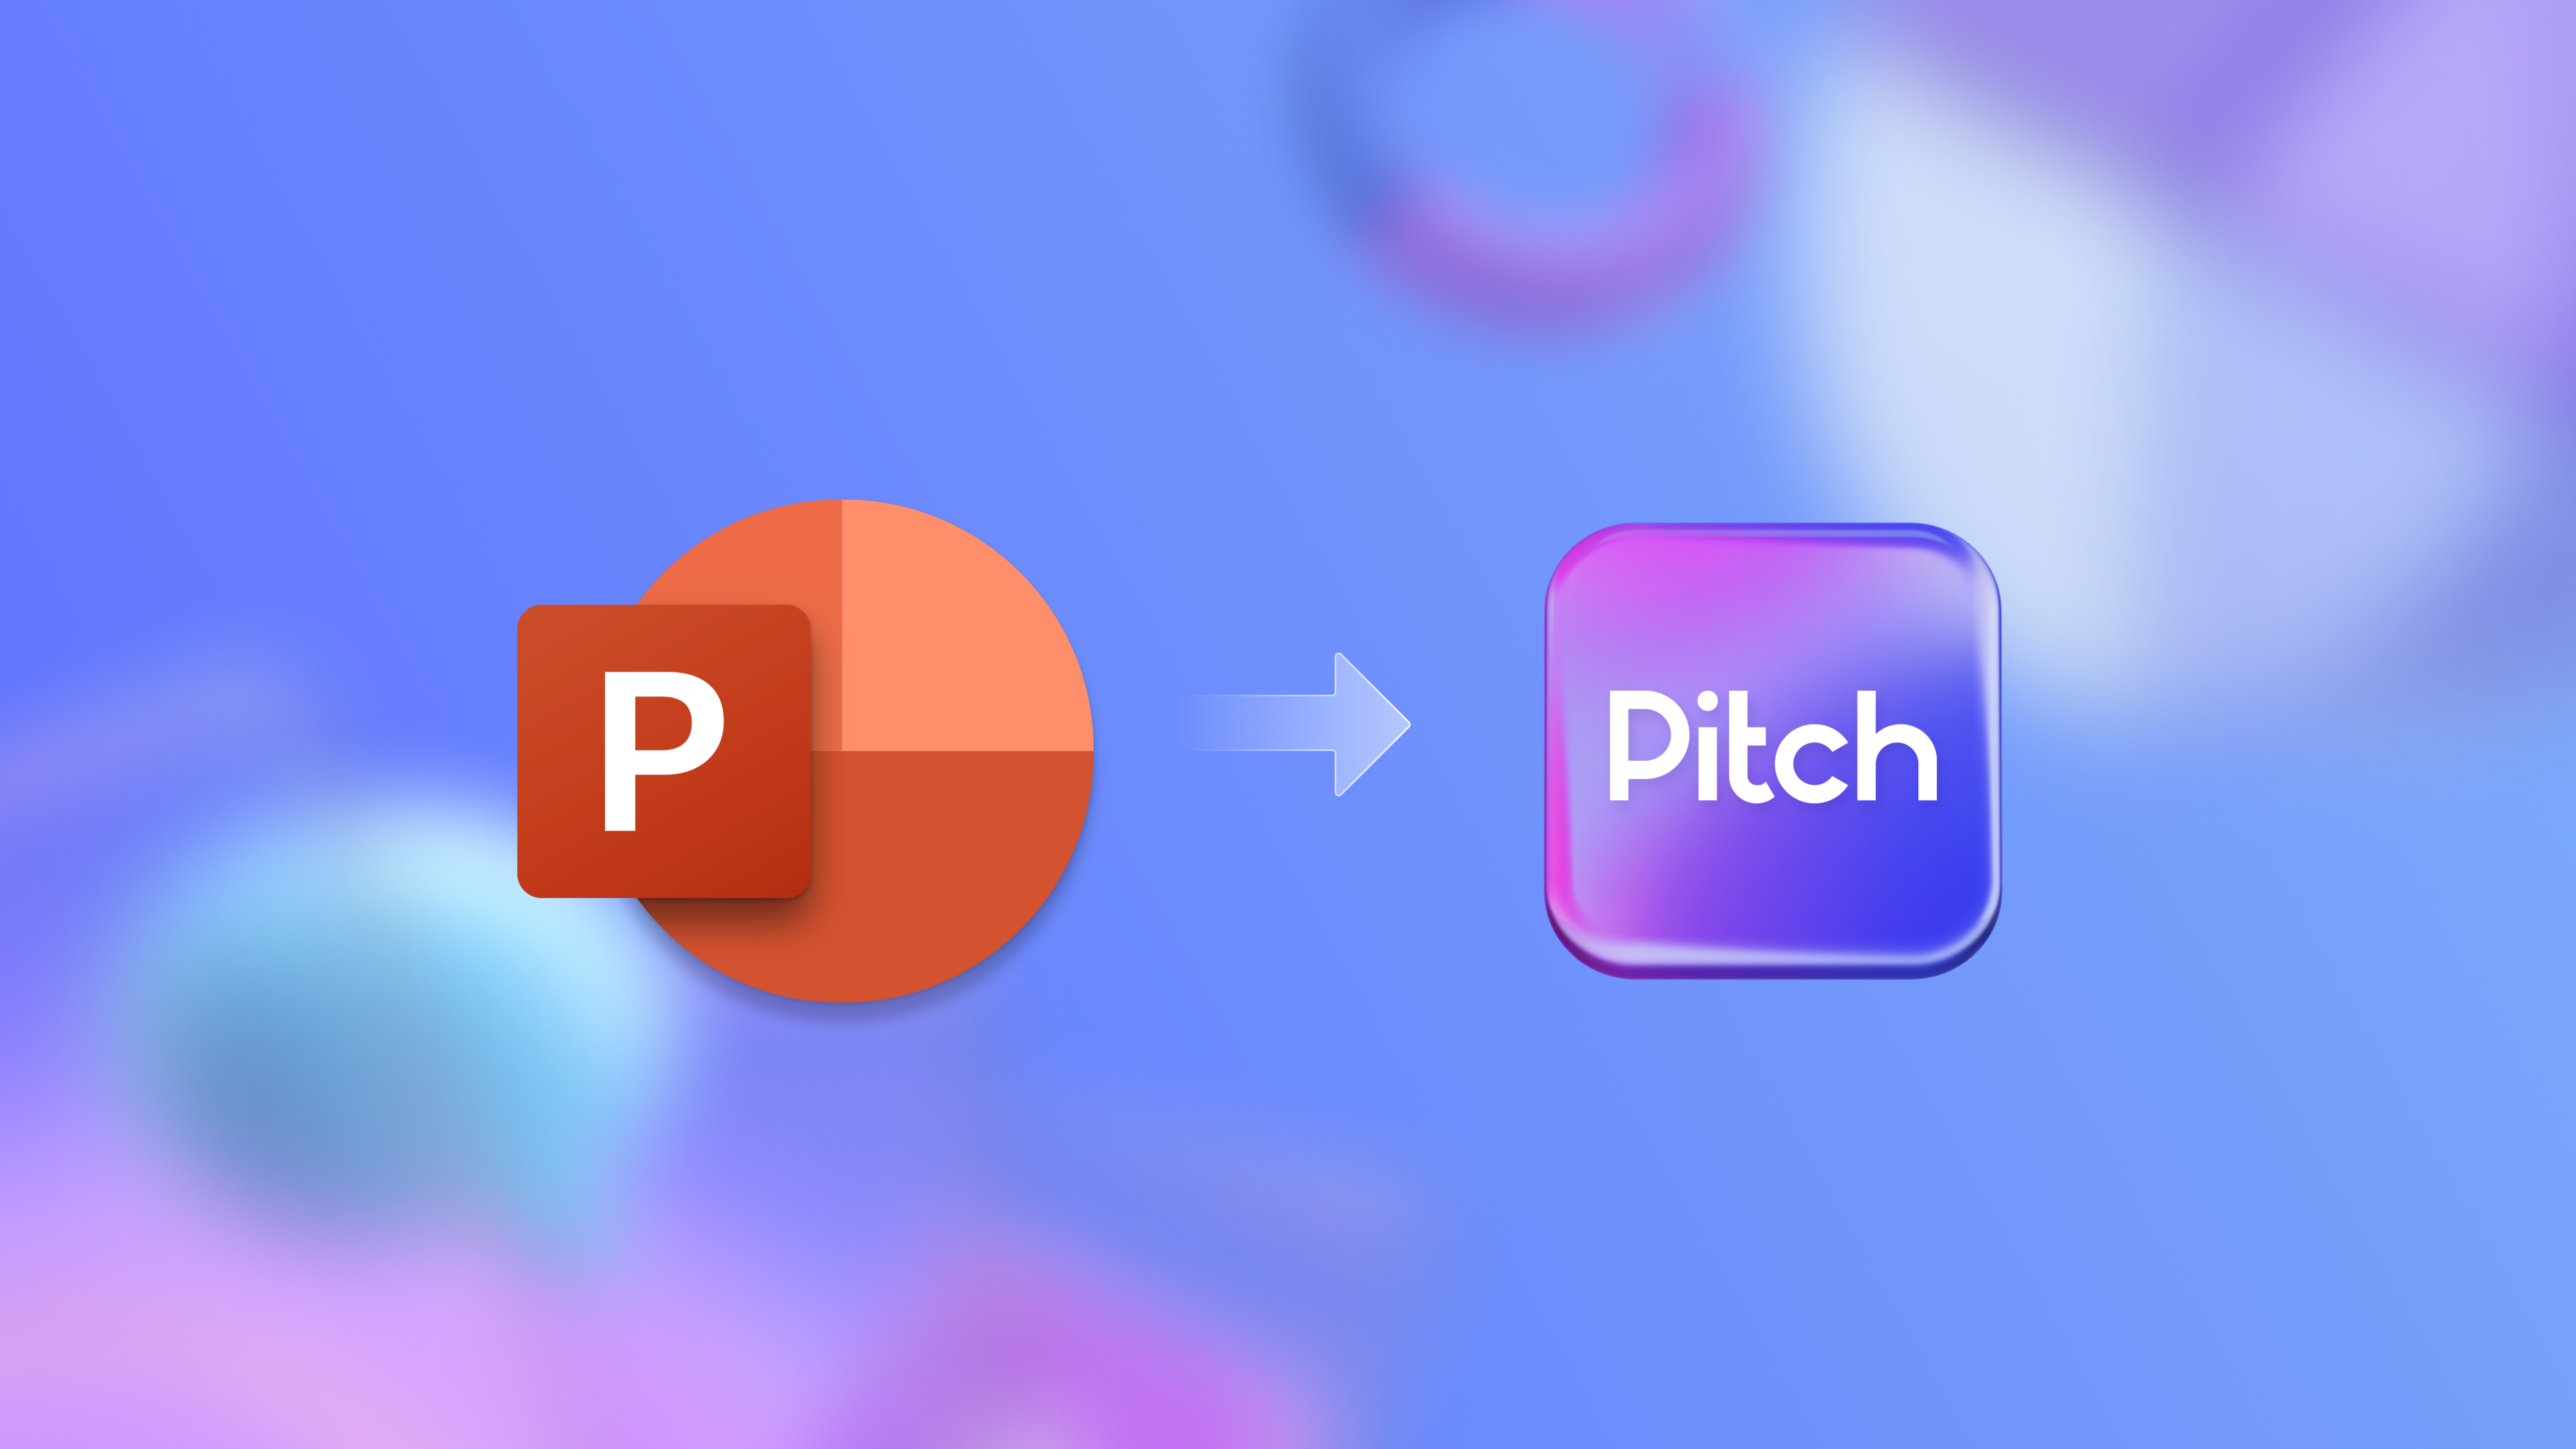 An easier switch to Pitch